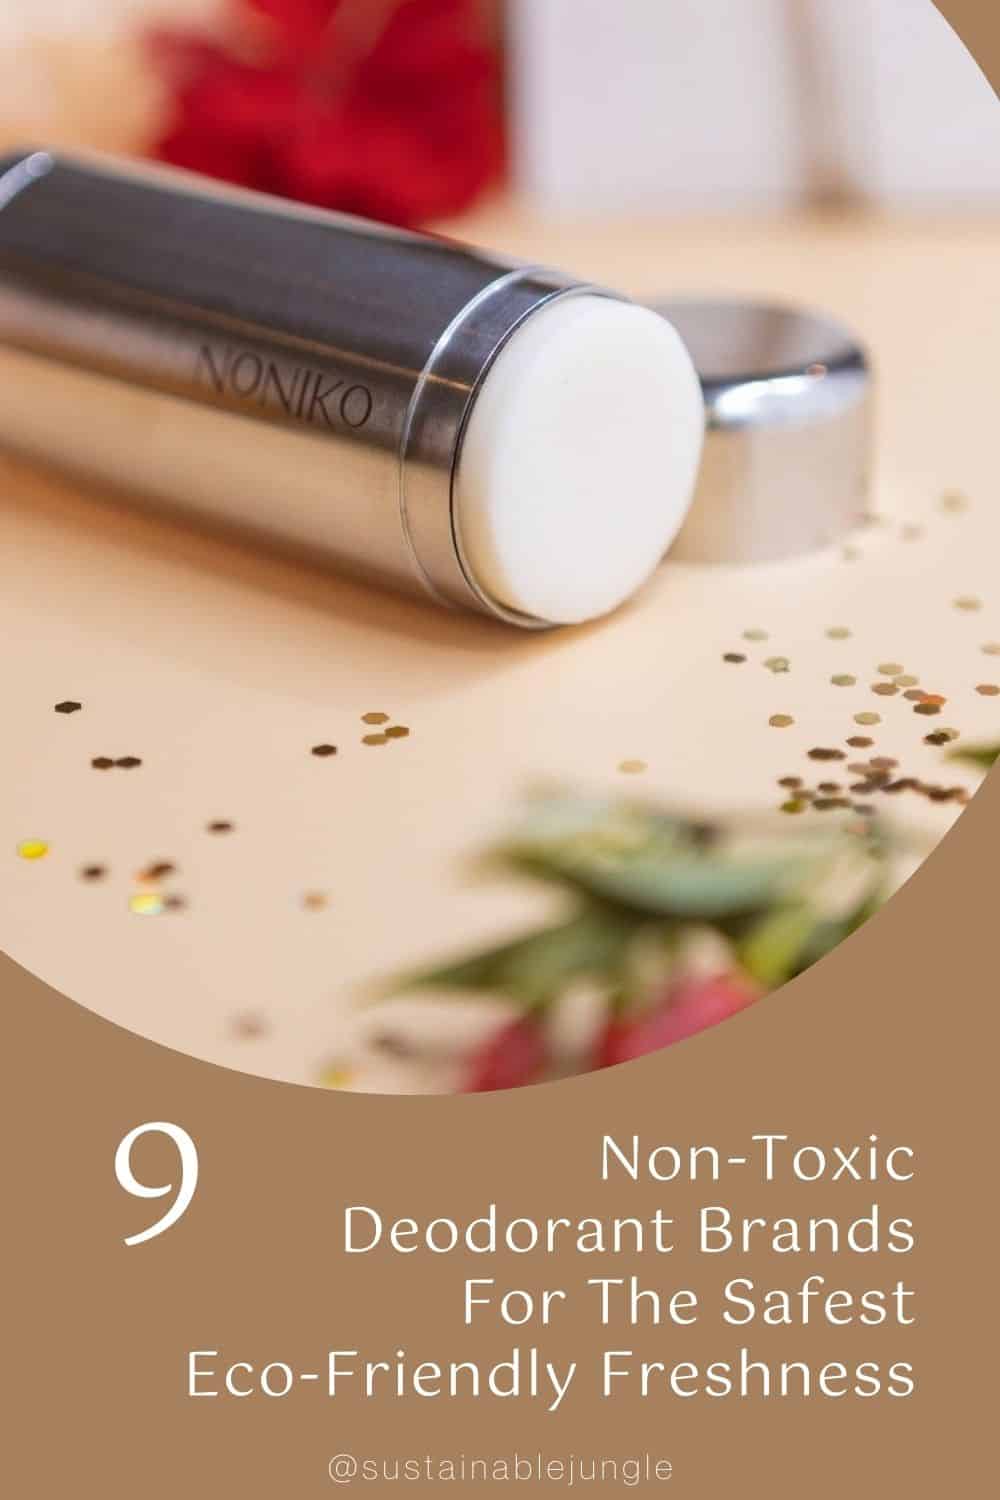 9 Non-Toxic Deodorant Brands For The Safest Eco-Friendly Freshness Image by Noniko #nontoxicdeodorant #safedeodorant #safestdeodorantstouse #naturalnontoxicdeodrant #bestnontoxicdeodrant #safestdeodorantforwomen #safestdeodorantbrands #sustainablejungle